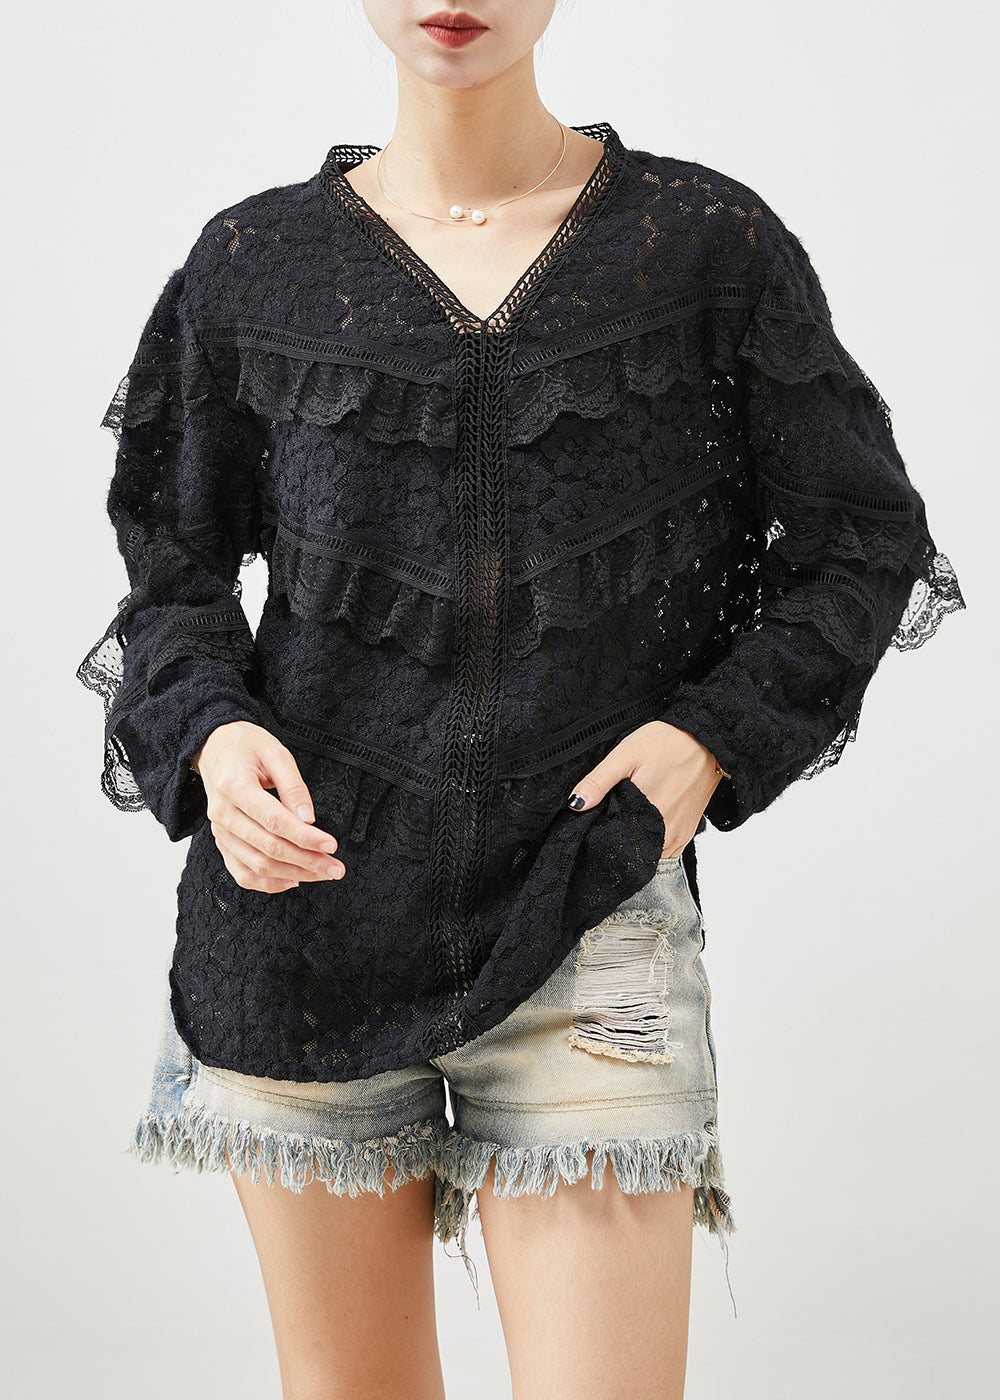 Style Black V Neck Patchwork Ruffles Lace Shirt Tops Fall